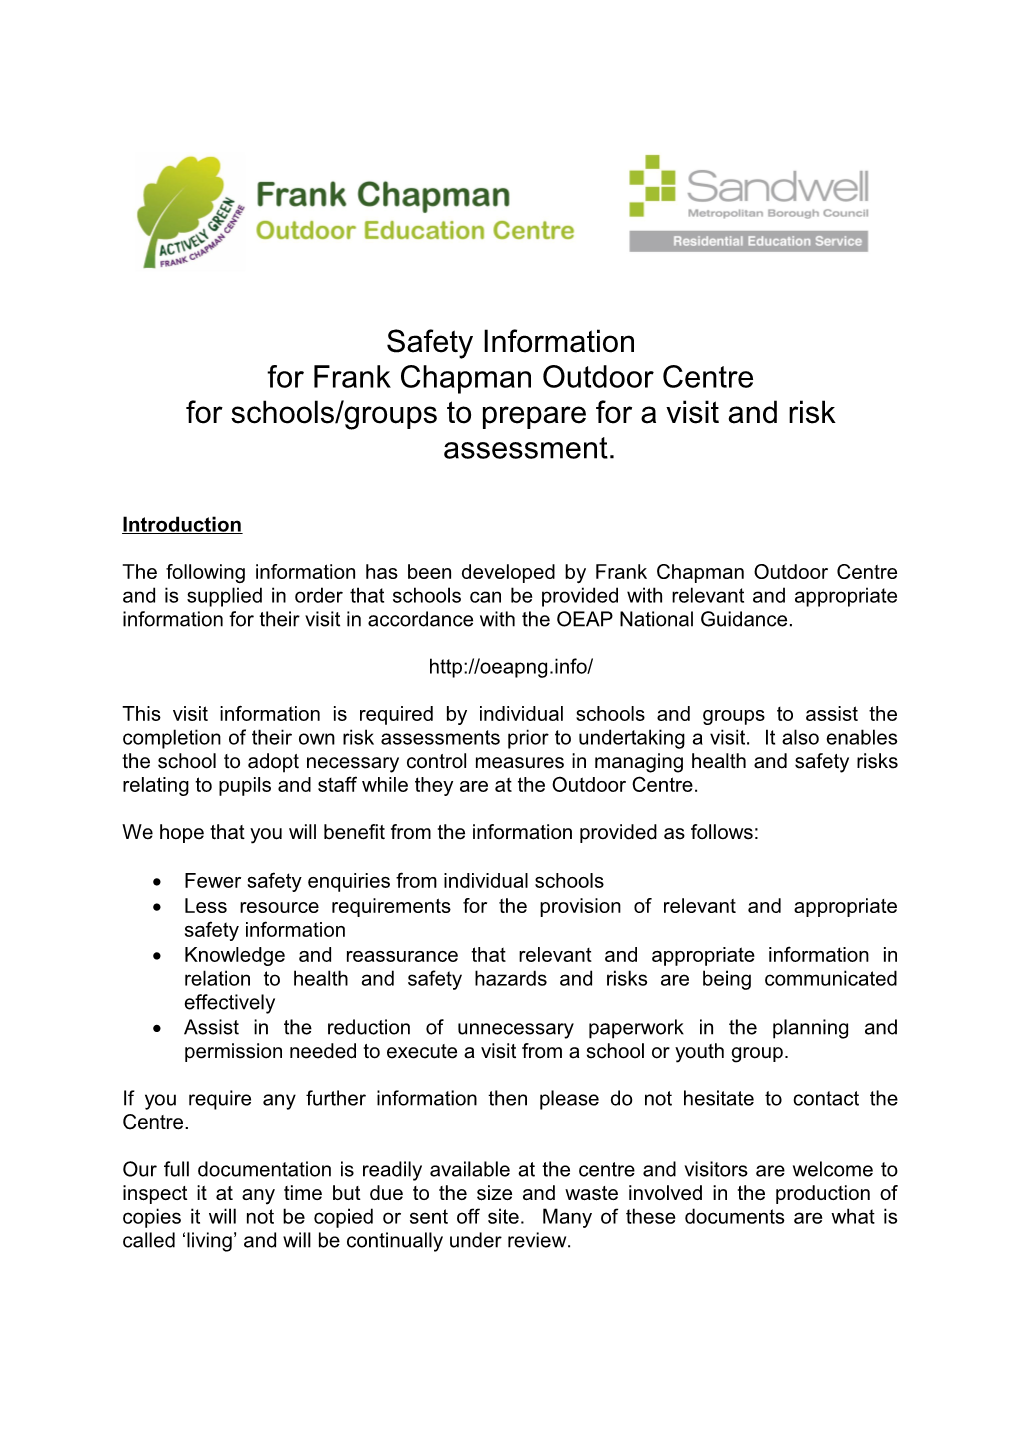 Venue Safety Information for Provision to Schools for Visits